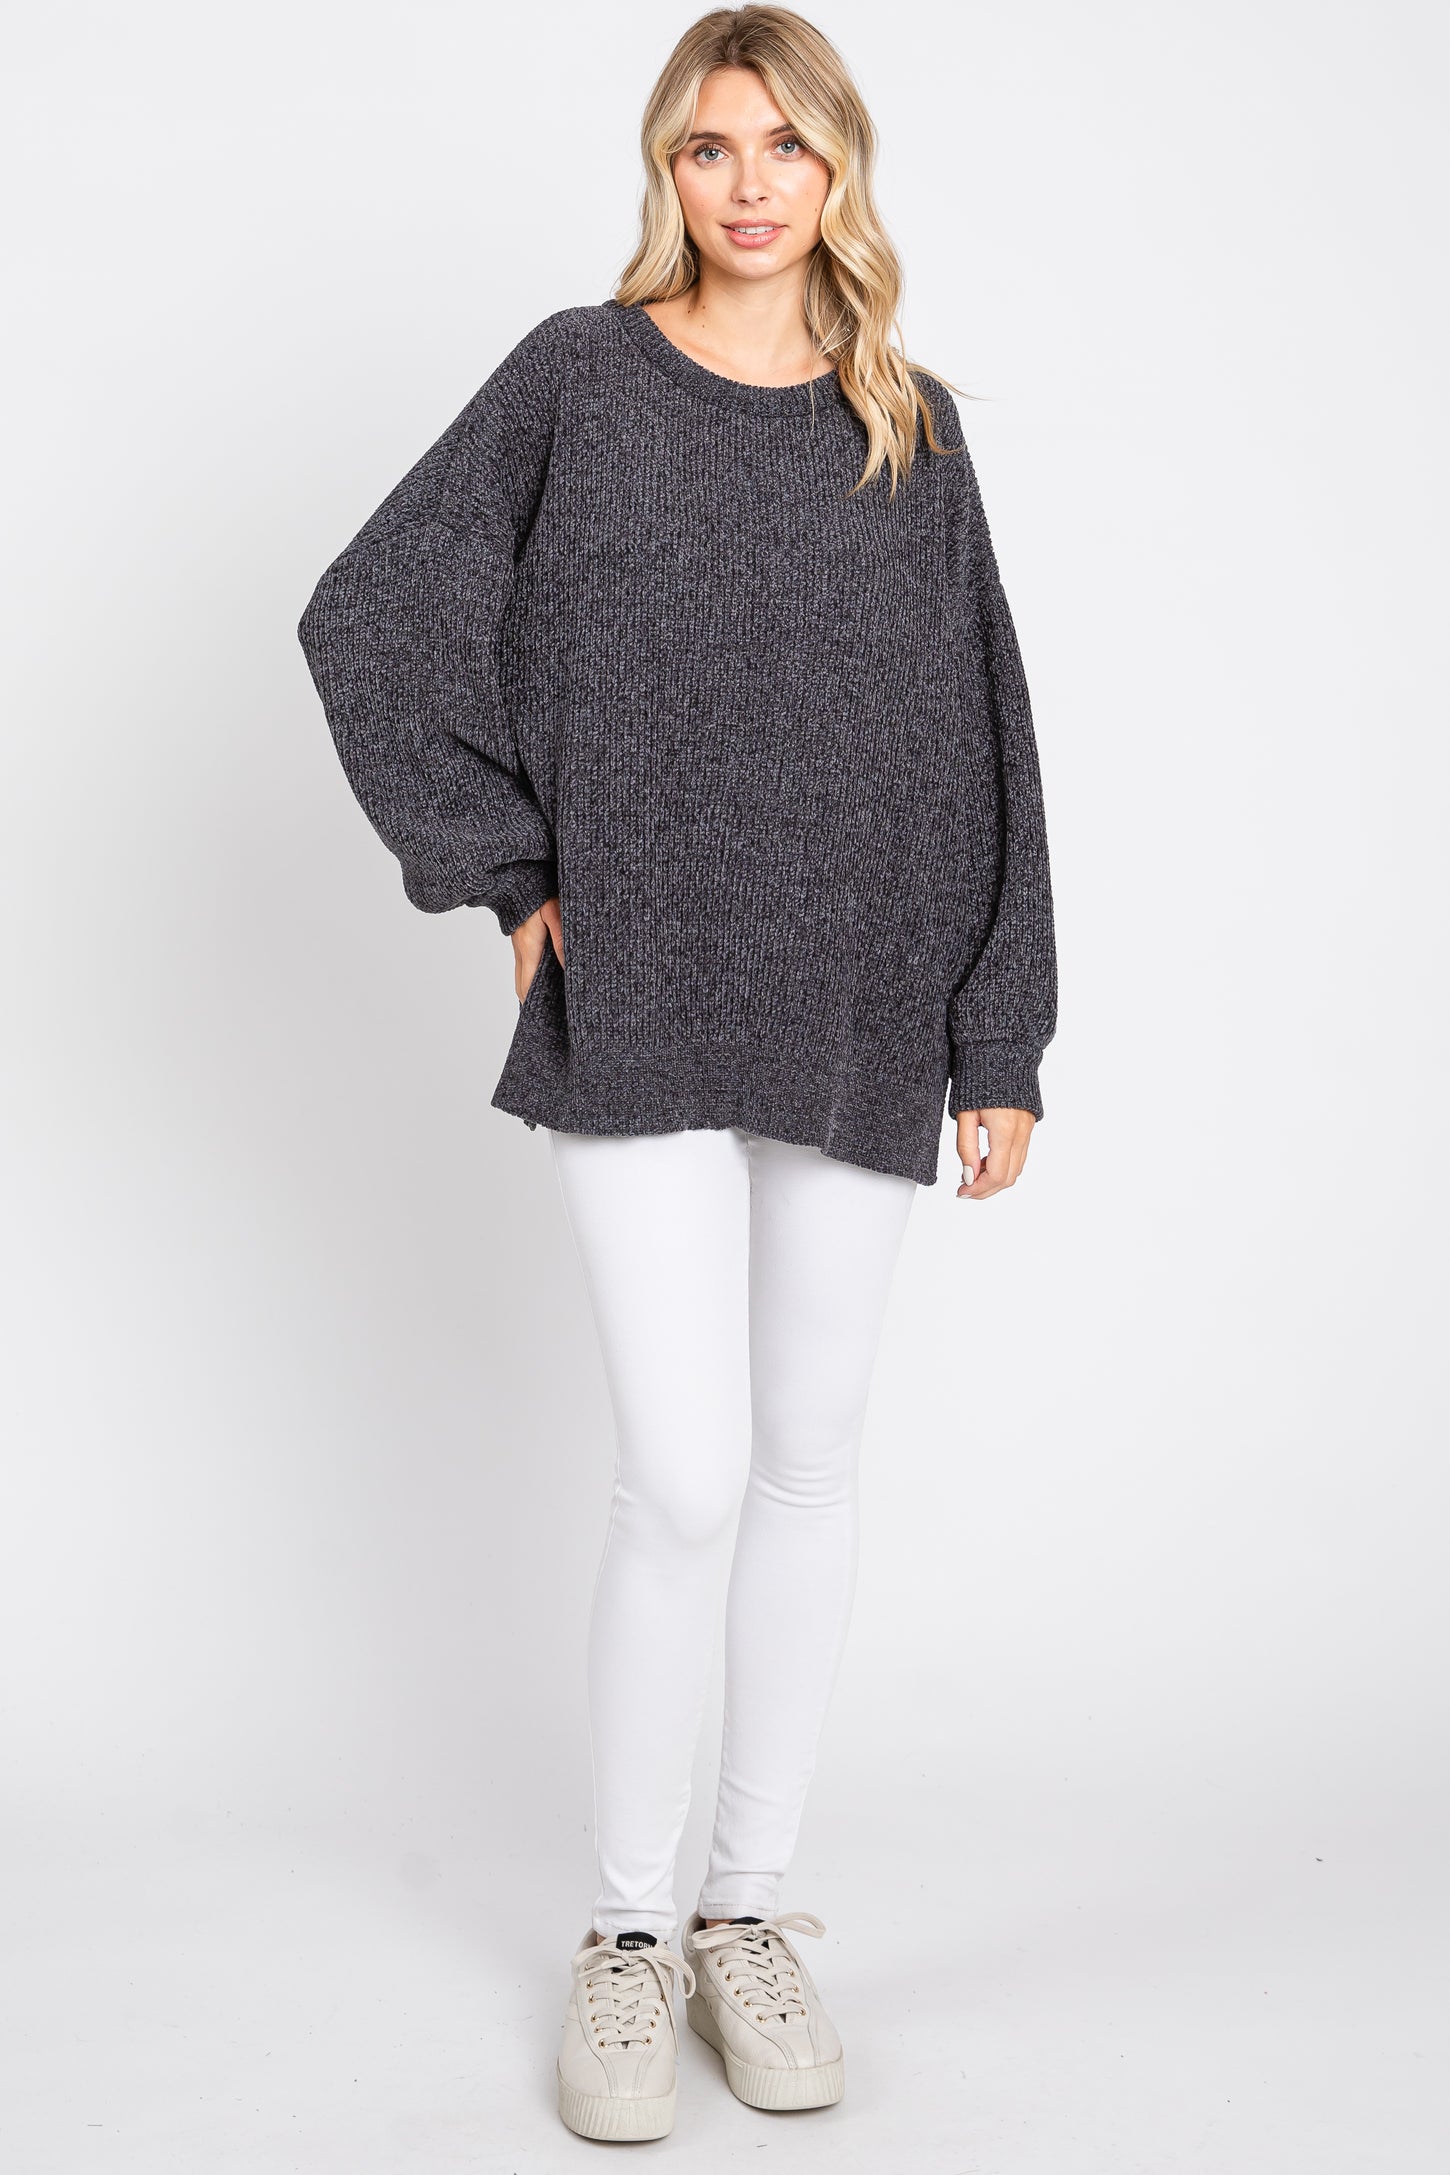 Charcoal Chenille Knit Balloon Sleeve Sweater